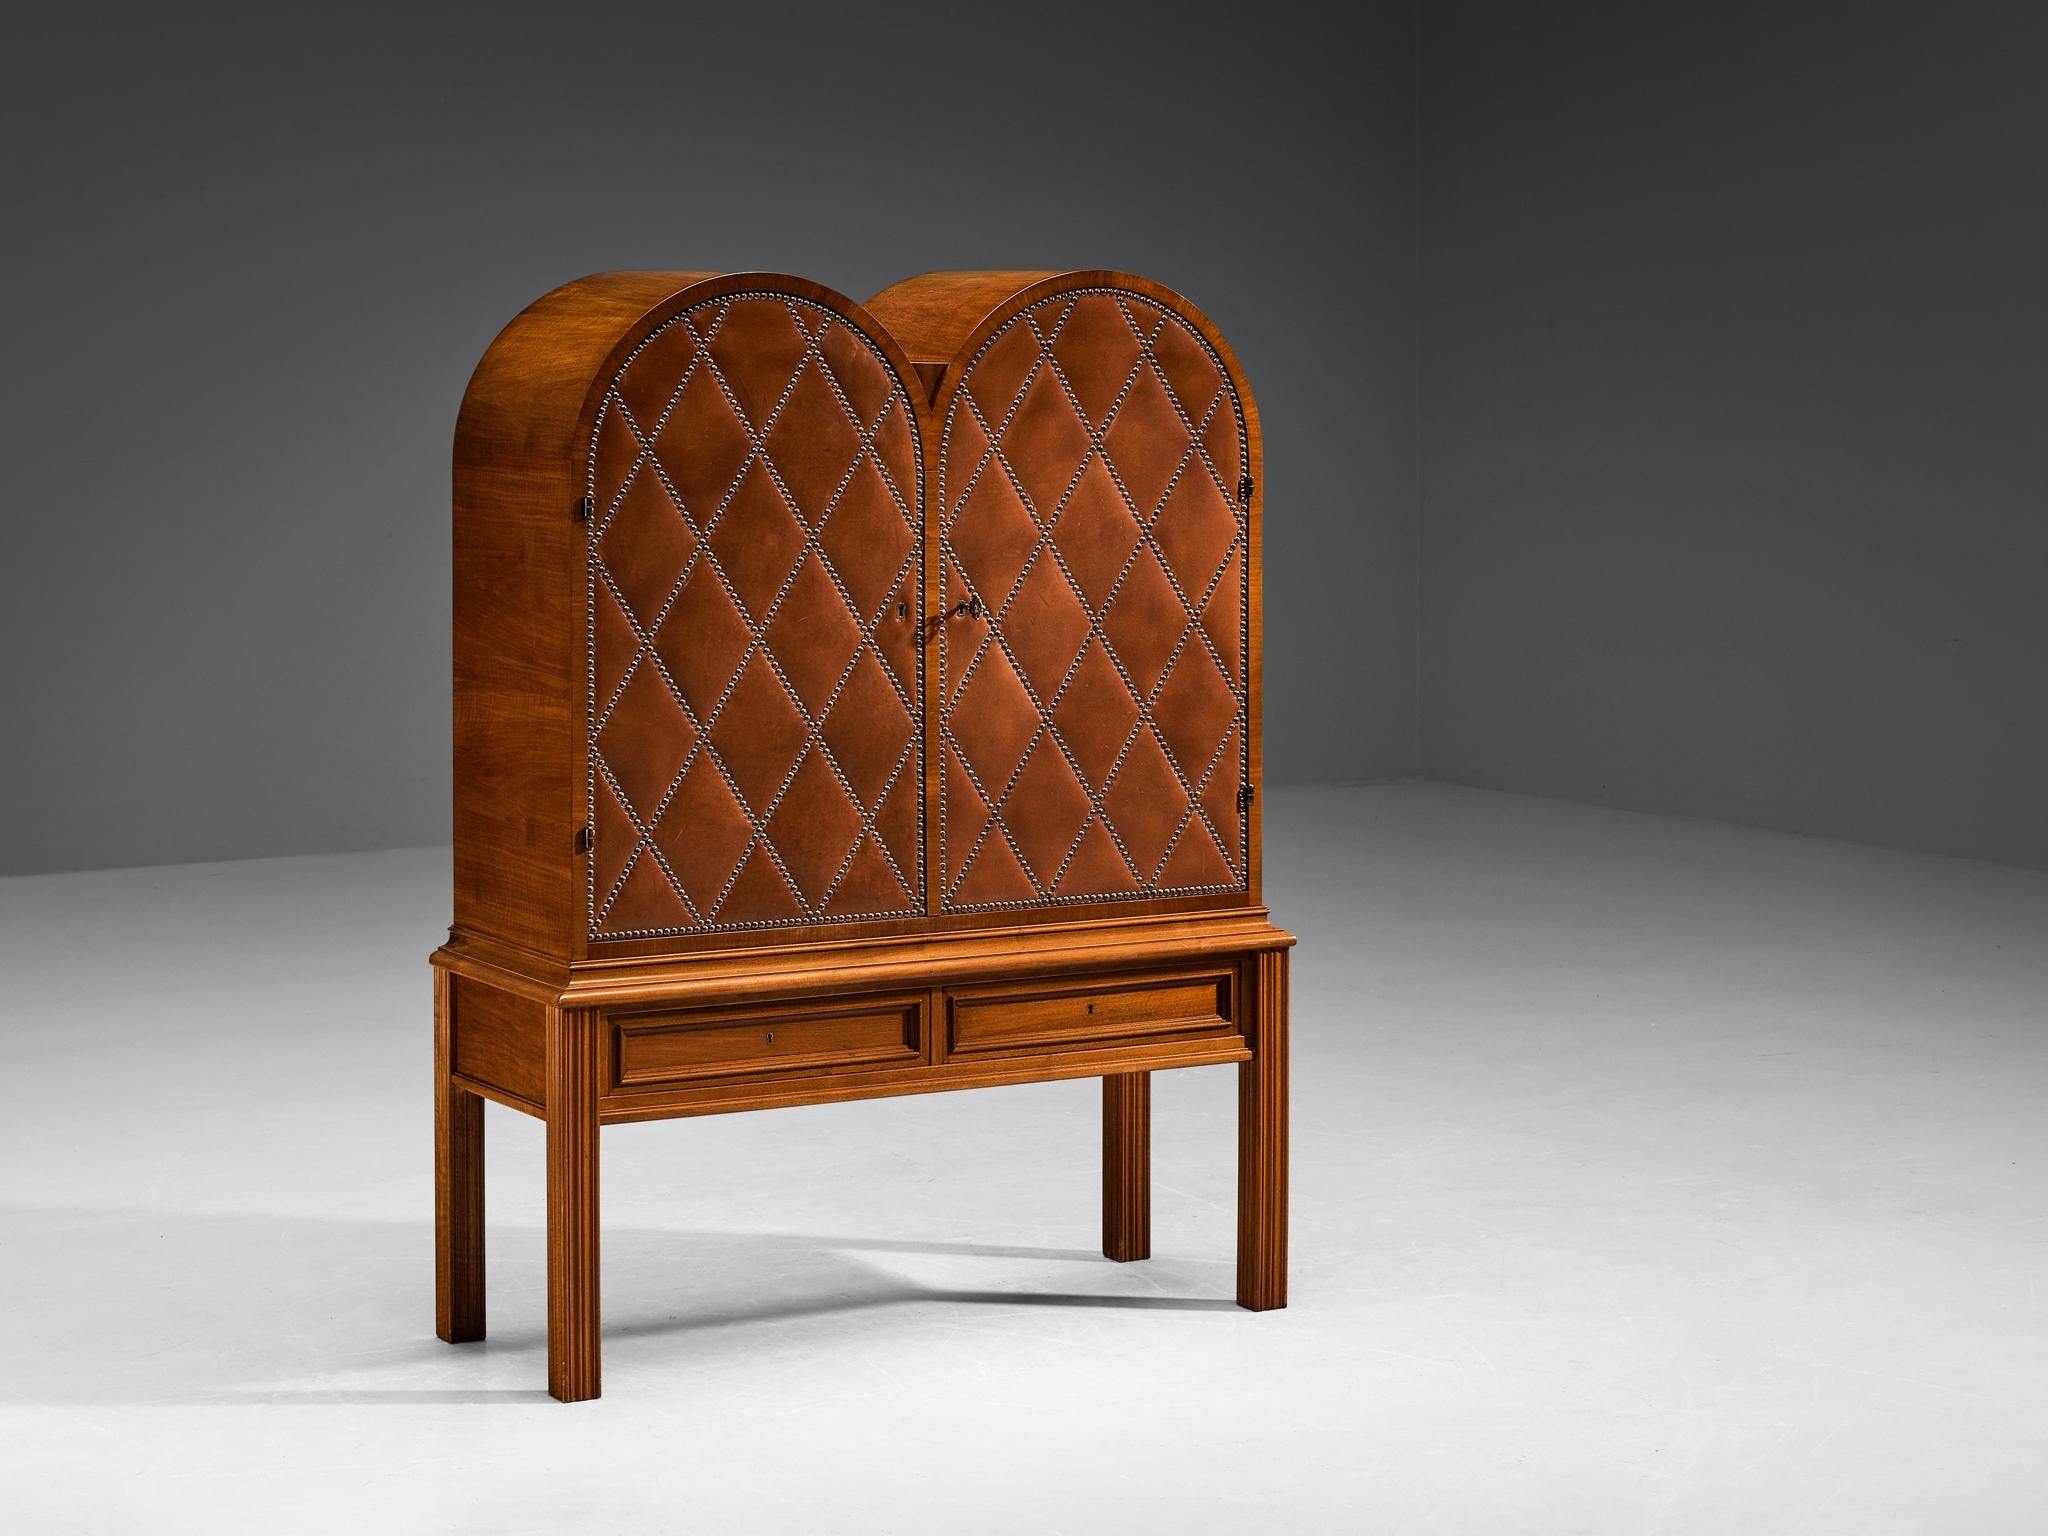 Rare Swedish Bar Cabinet in Walnut and Cognac Leather with Brass Nails